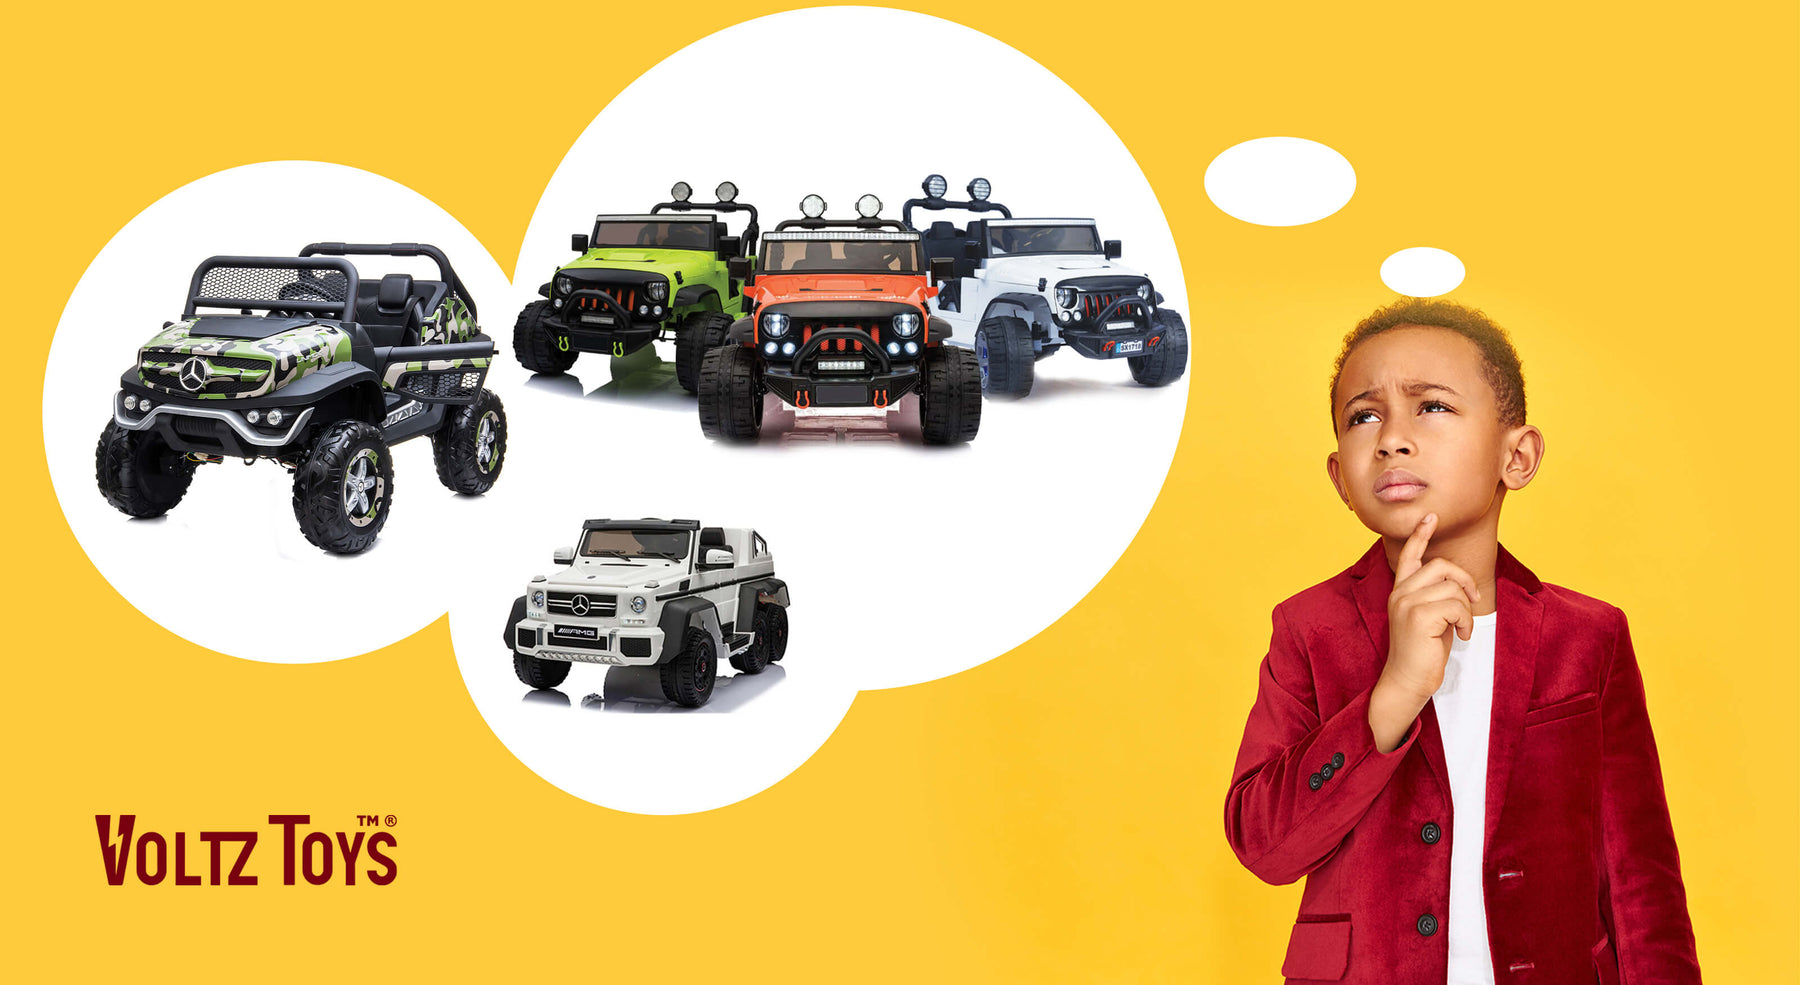 How to Choose a Kid-Friendly Ride On Car Online?